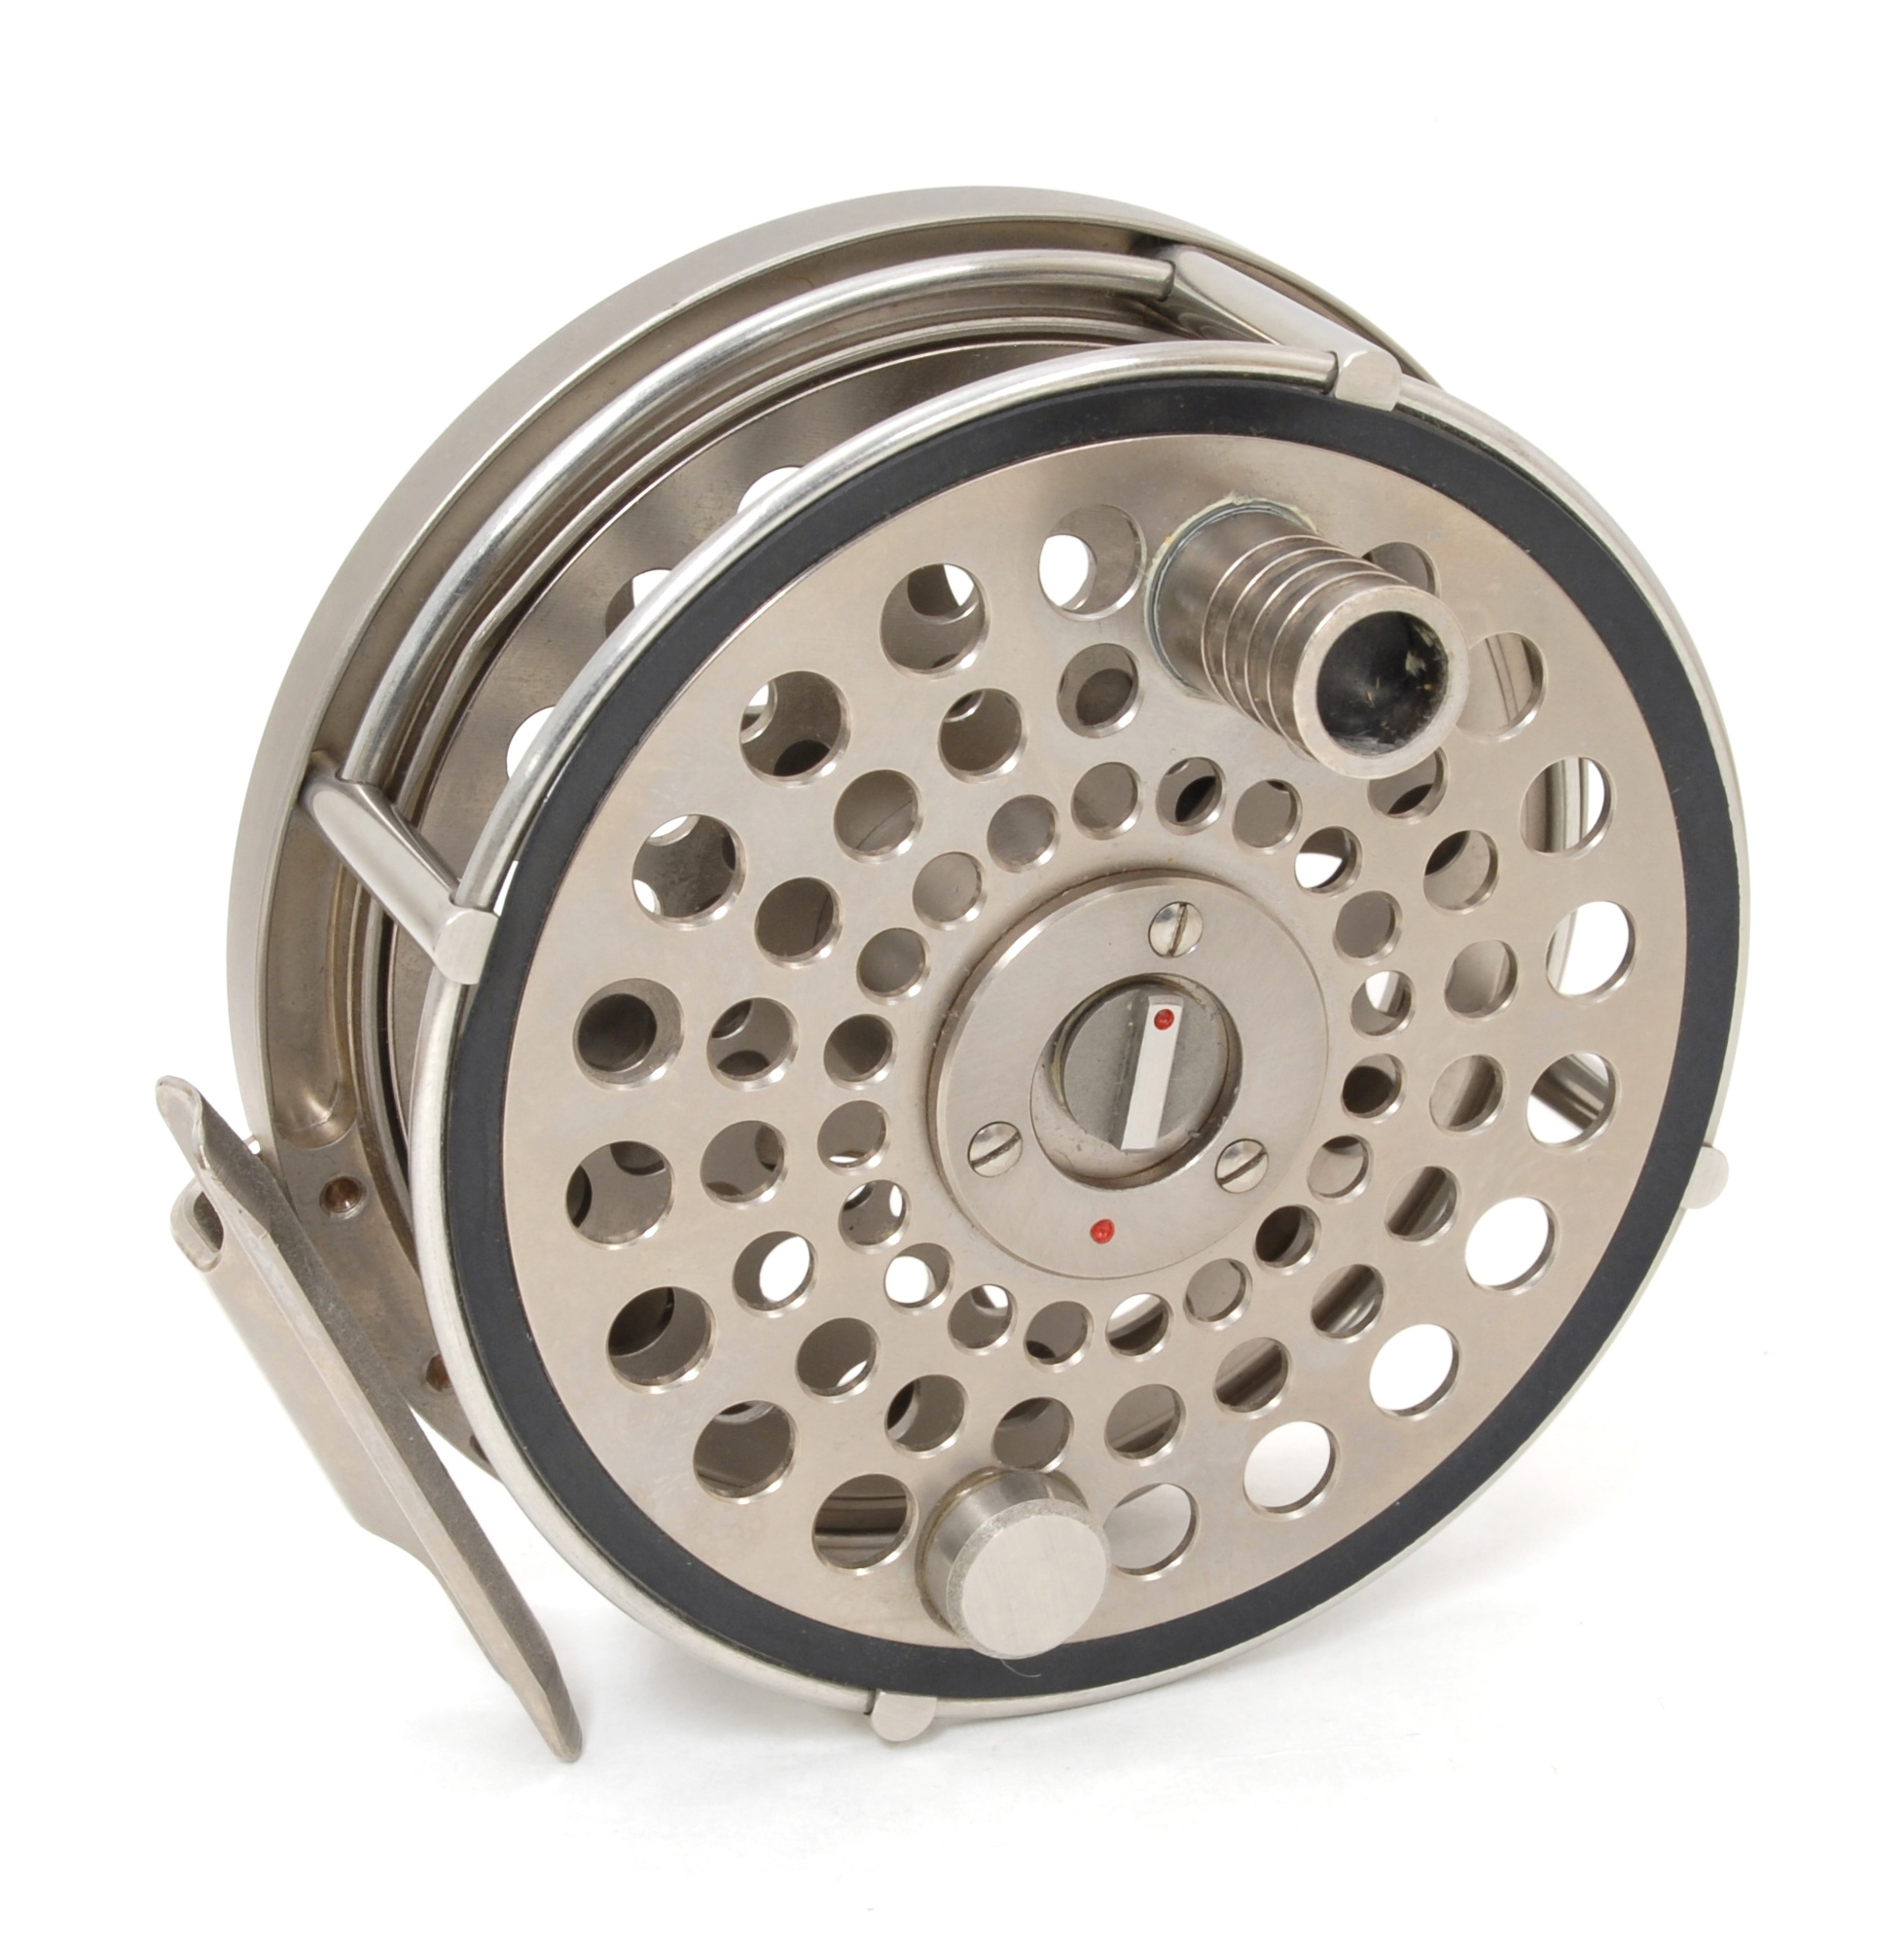 Fin-Nor Wedding Cake Reel - American Museum Of Fly Fishing